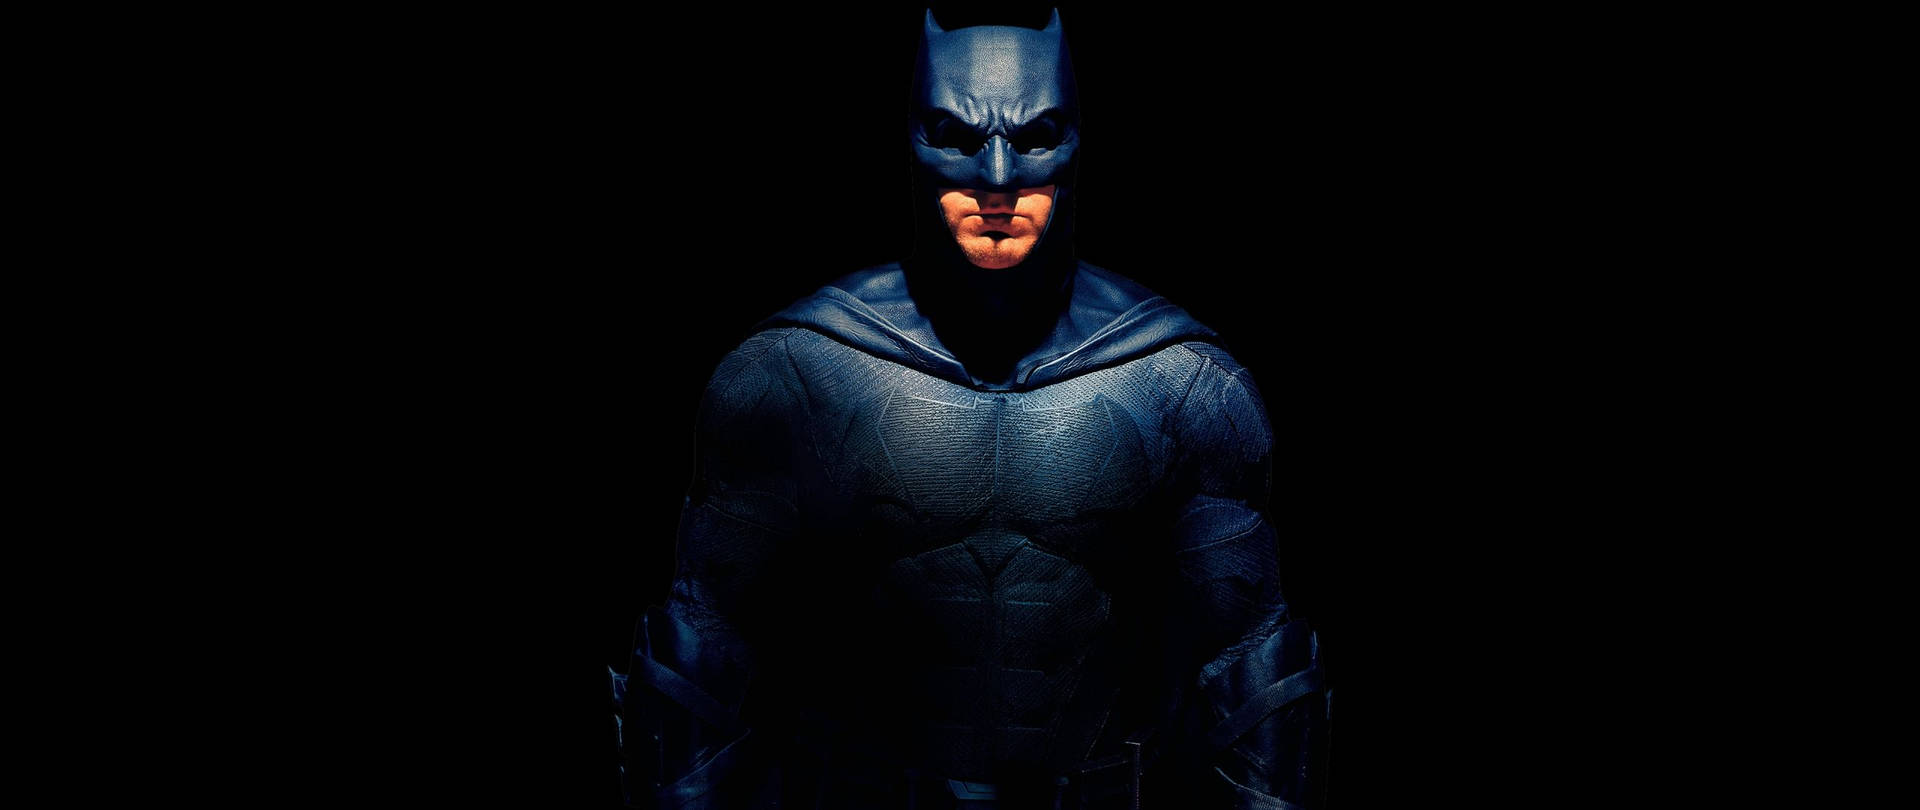 1.  Batman emerges from the shadows in this 2560x1080 wallpaper Wallpaper